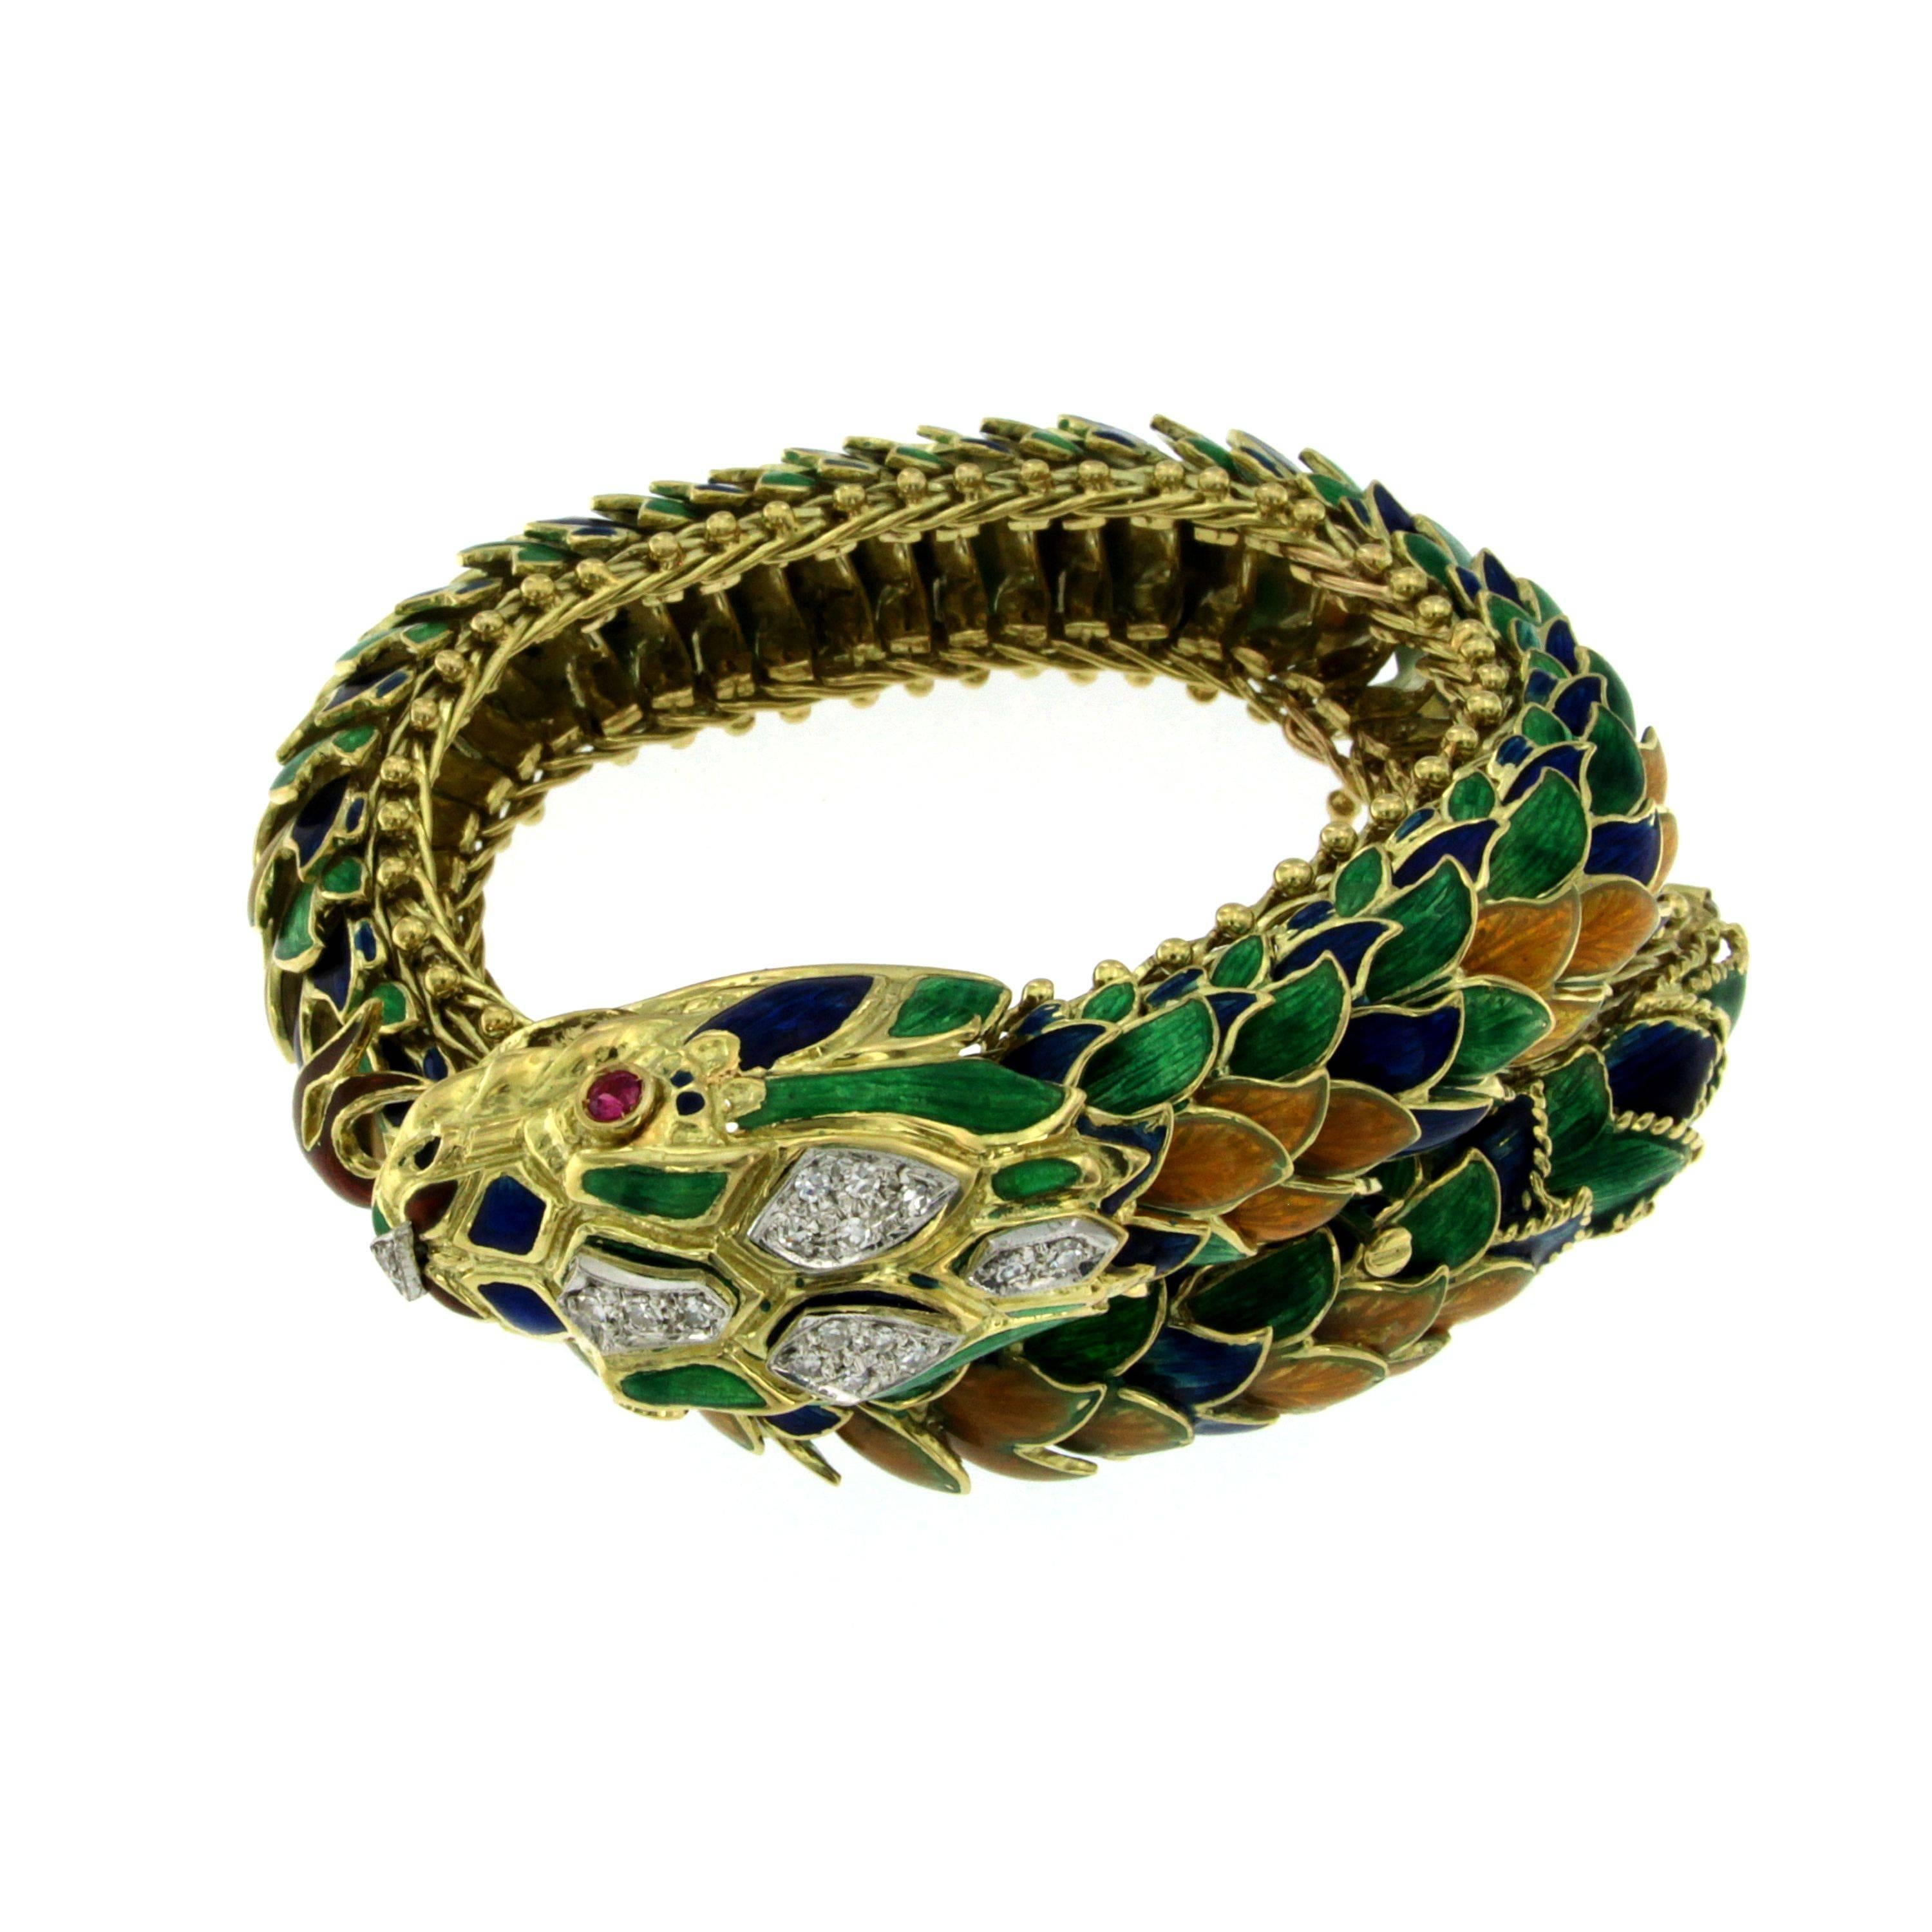 Impressive diamond, ruby, enamel 9.80 inches of reptilian-inspried fine jewelry… Intense blue, green and orange enamel scales gently lift and move as you don this lovely bracelet. Resembling a dragon's tail or colorful serpent, this is a masterfully